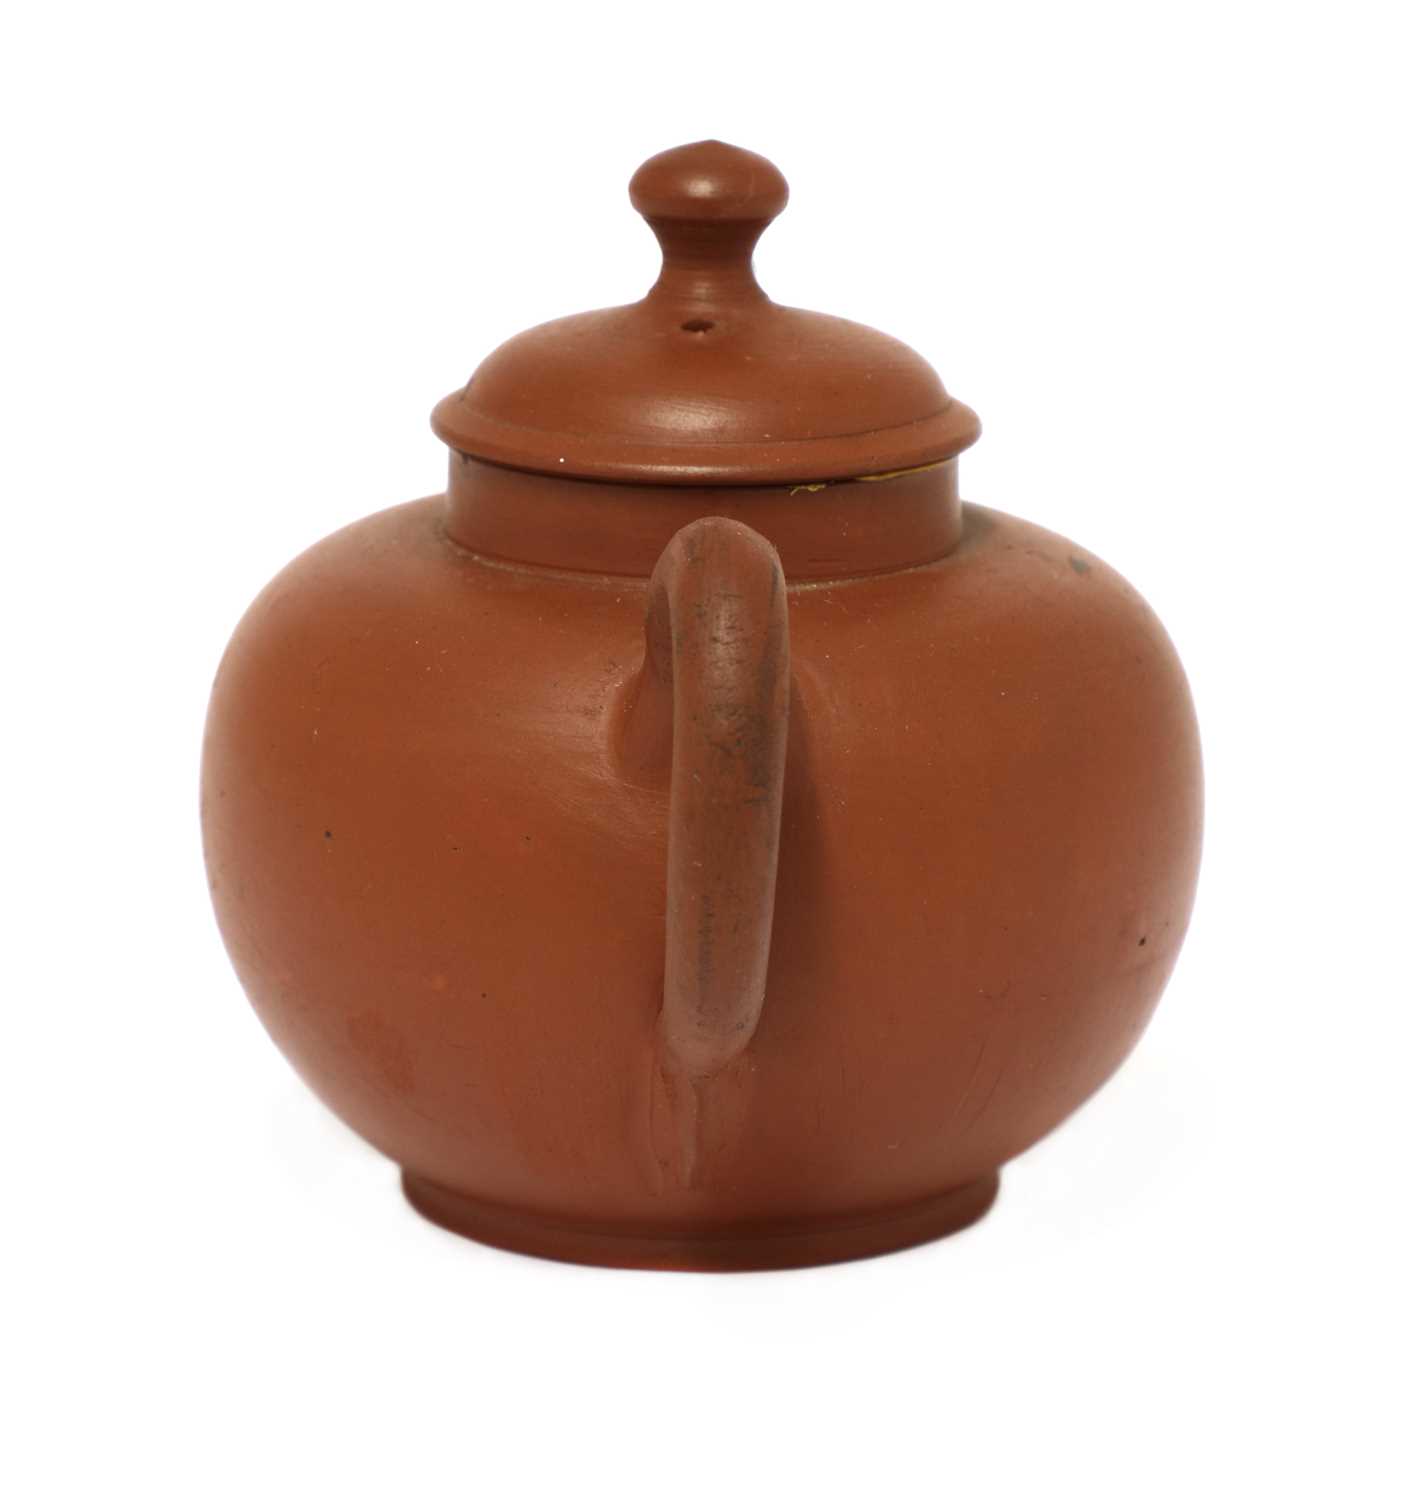 An unusual Staffordshire redware miniature globular teapot and cover, - Image 3 of 4